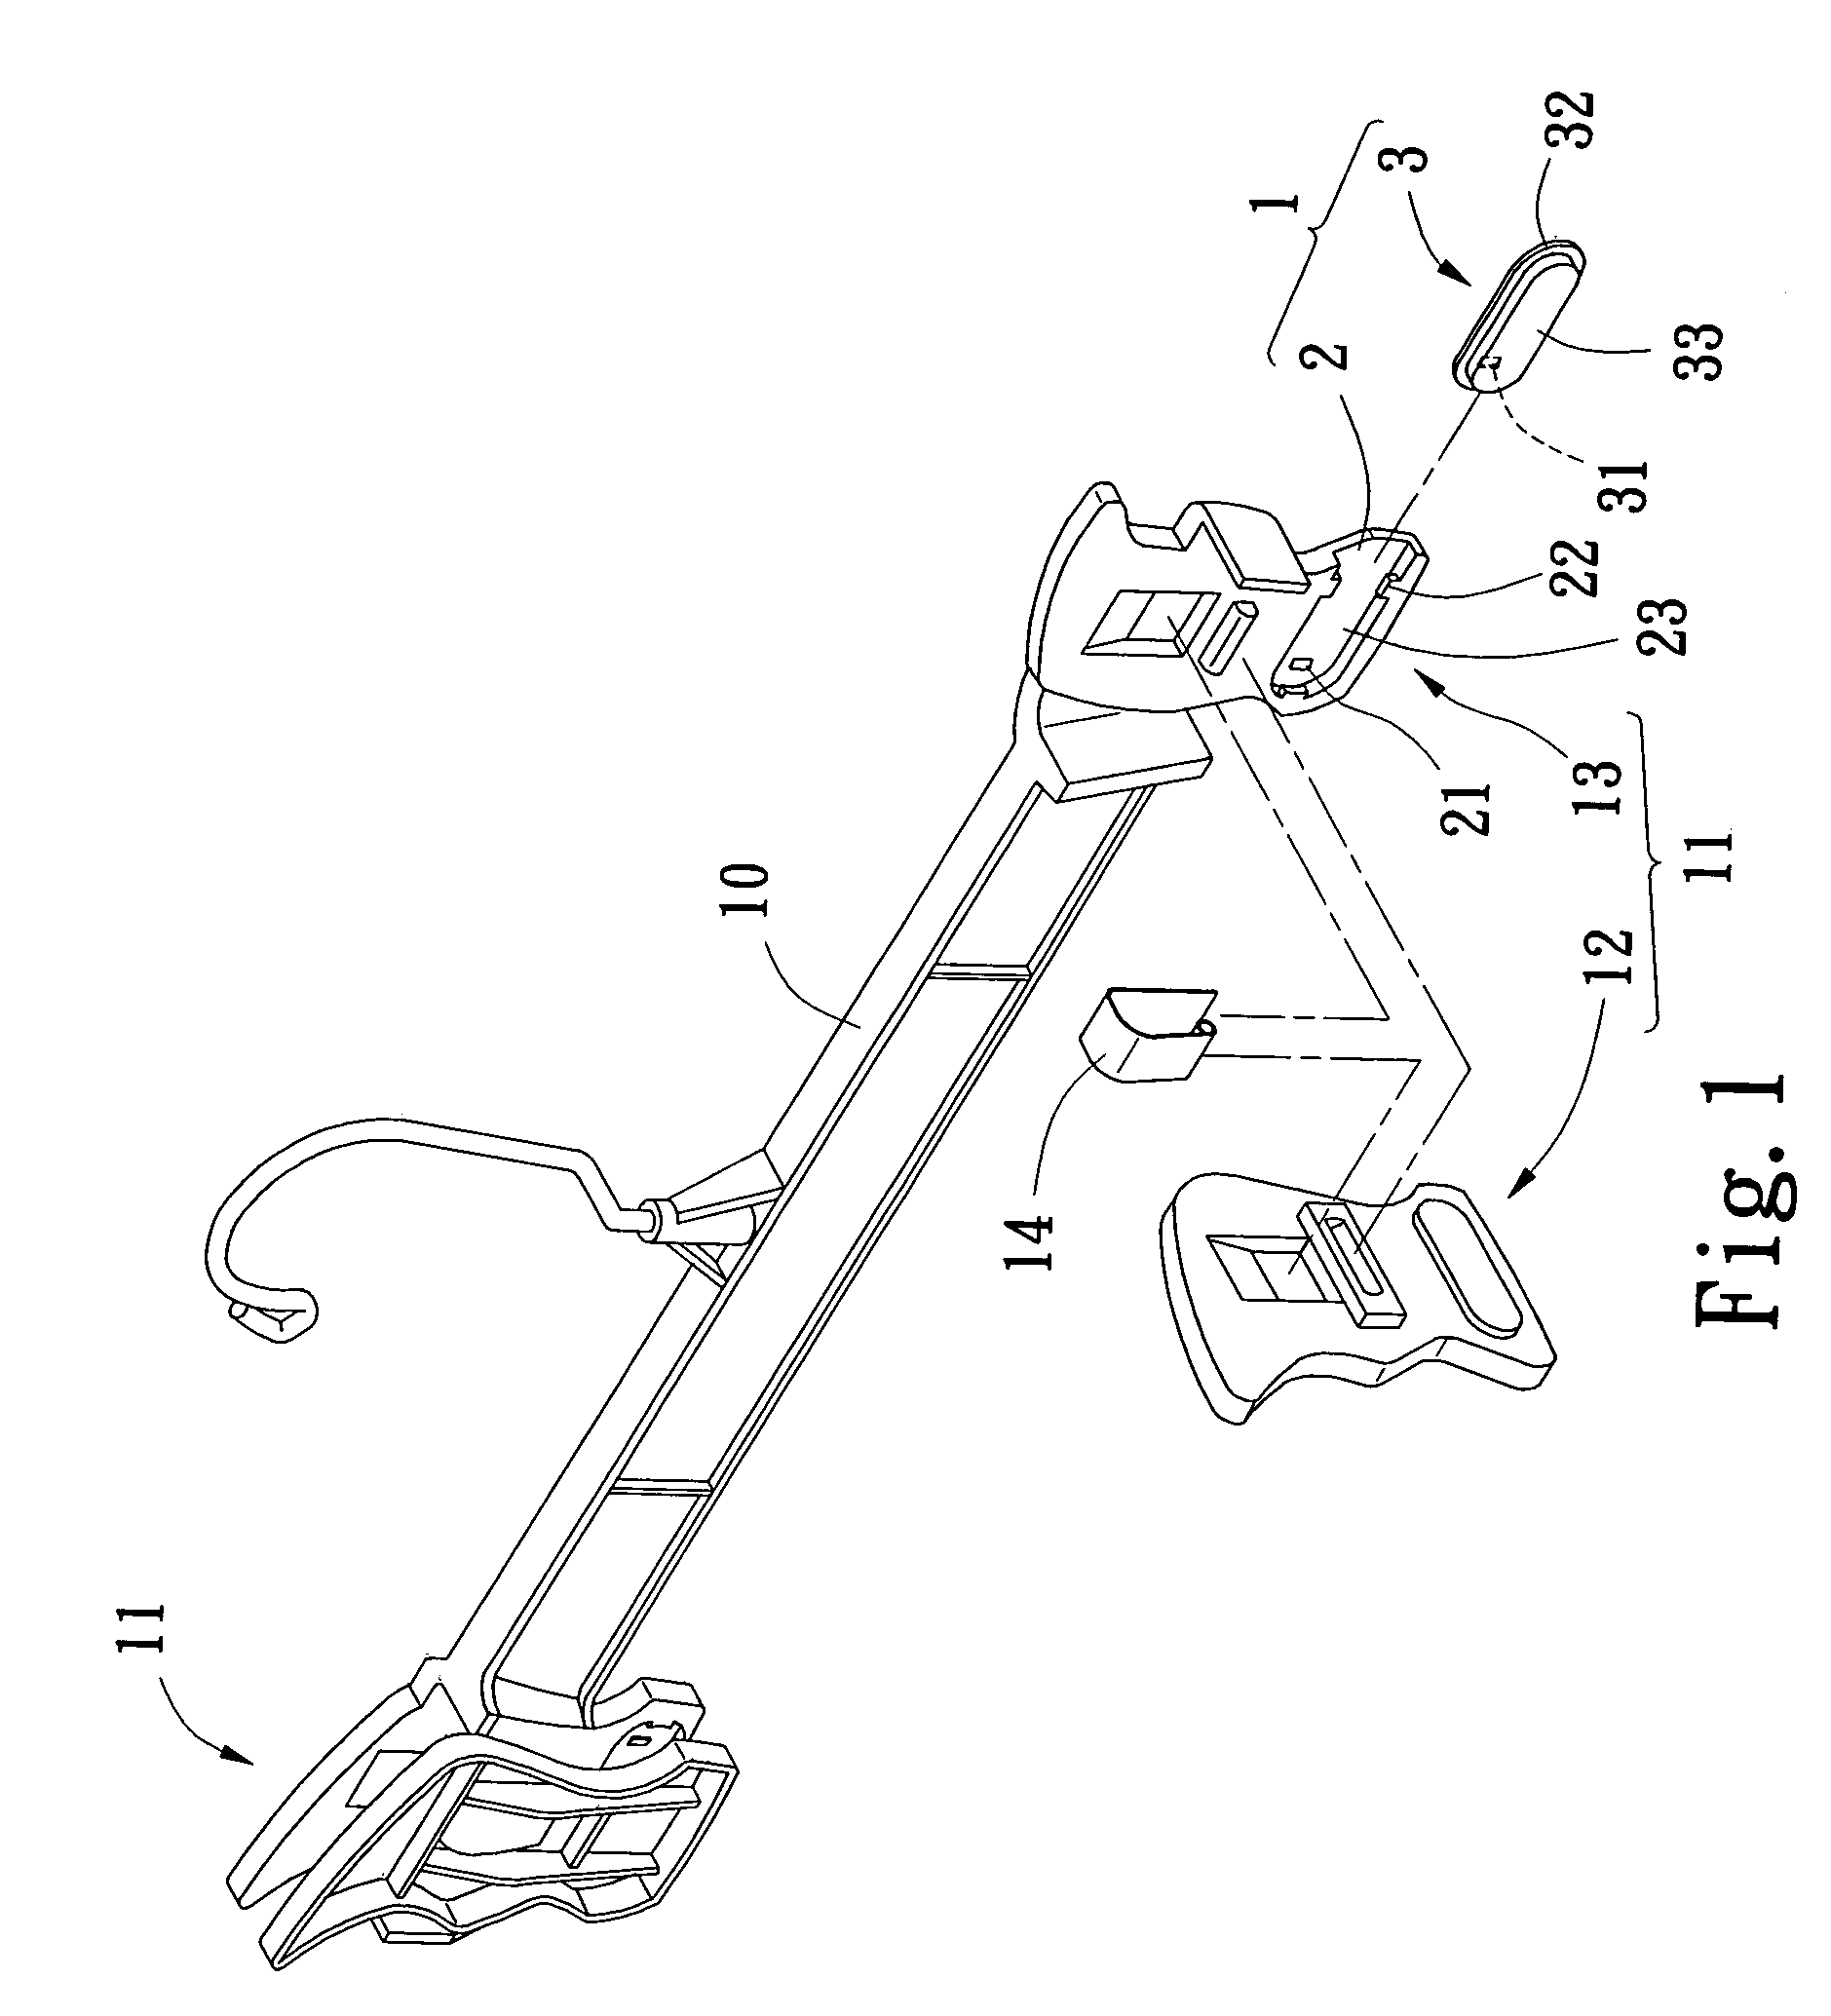 Combination method of a modularized clamp structure